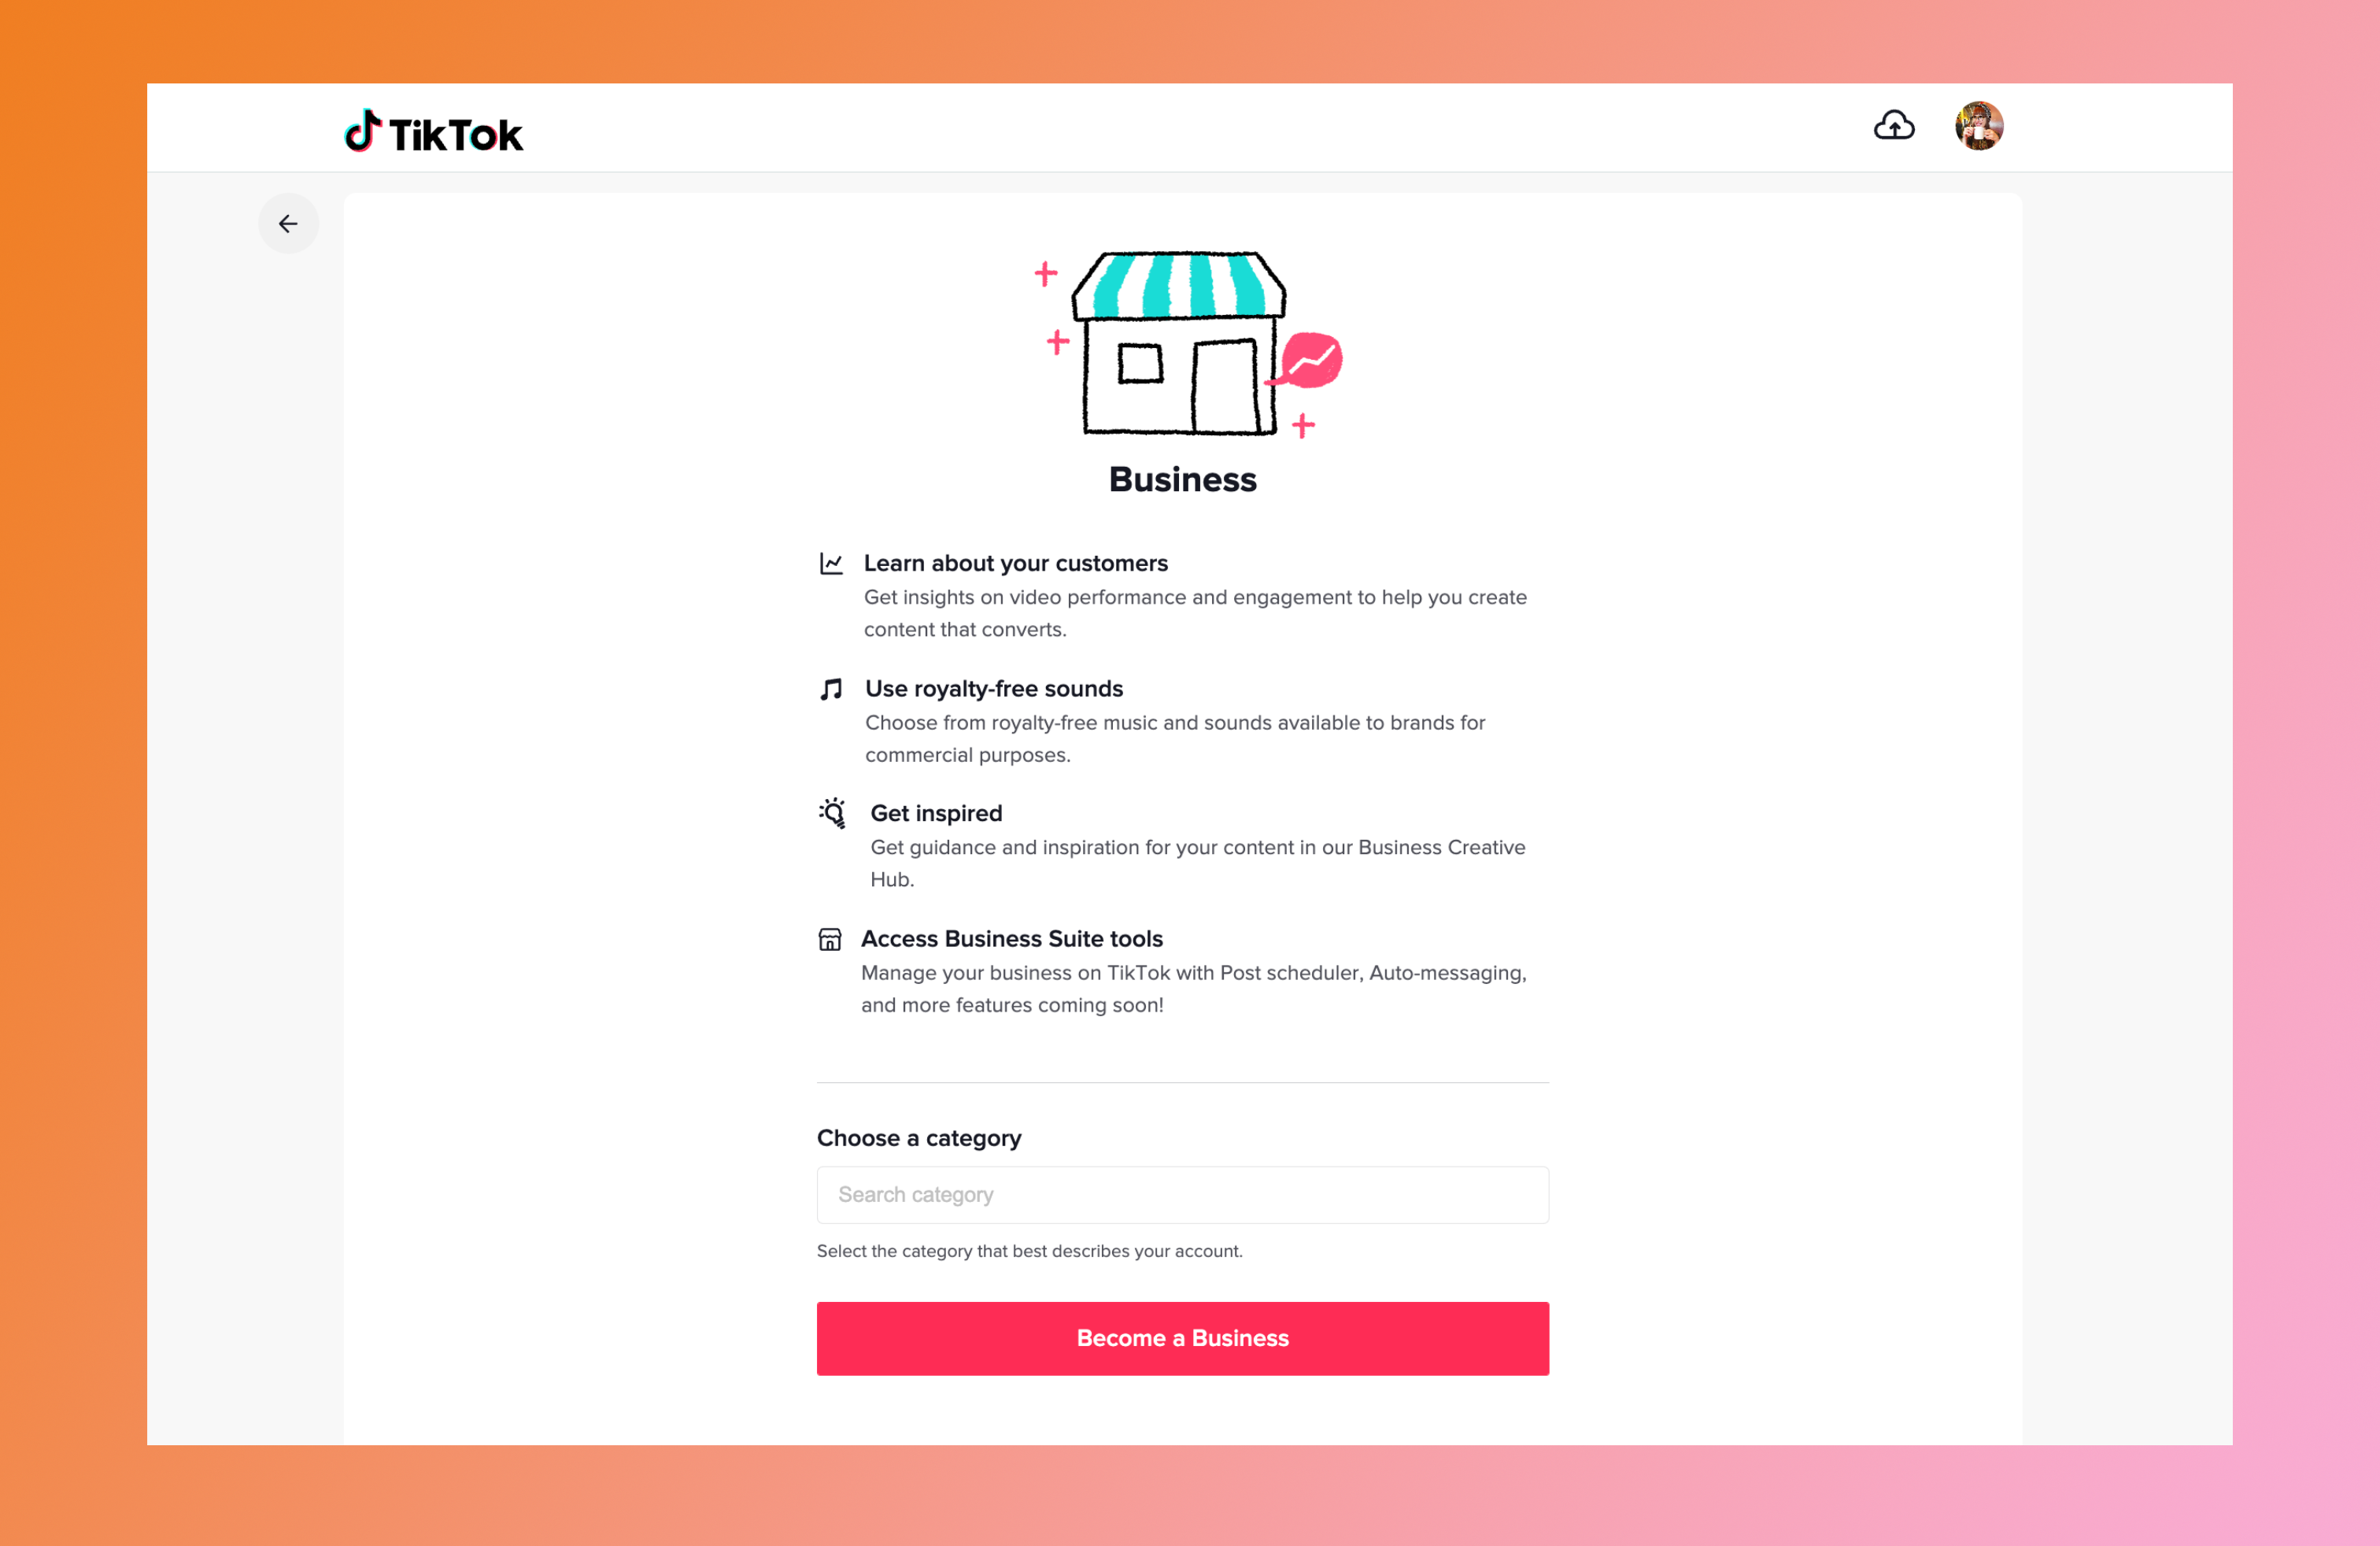 Interface for TikTok's business account sign up